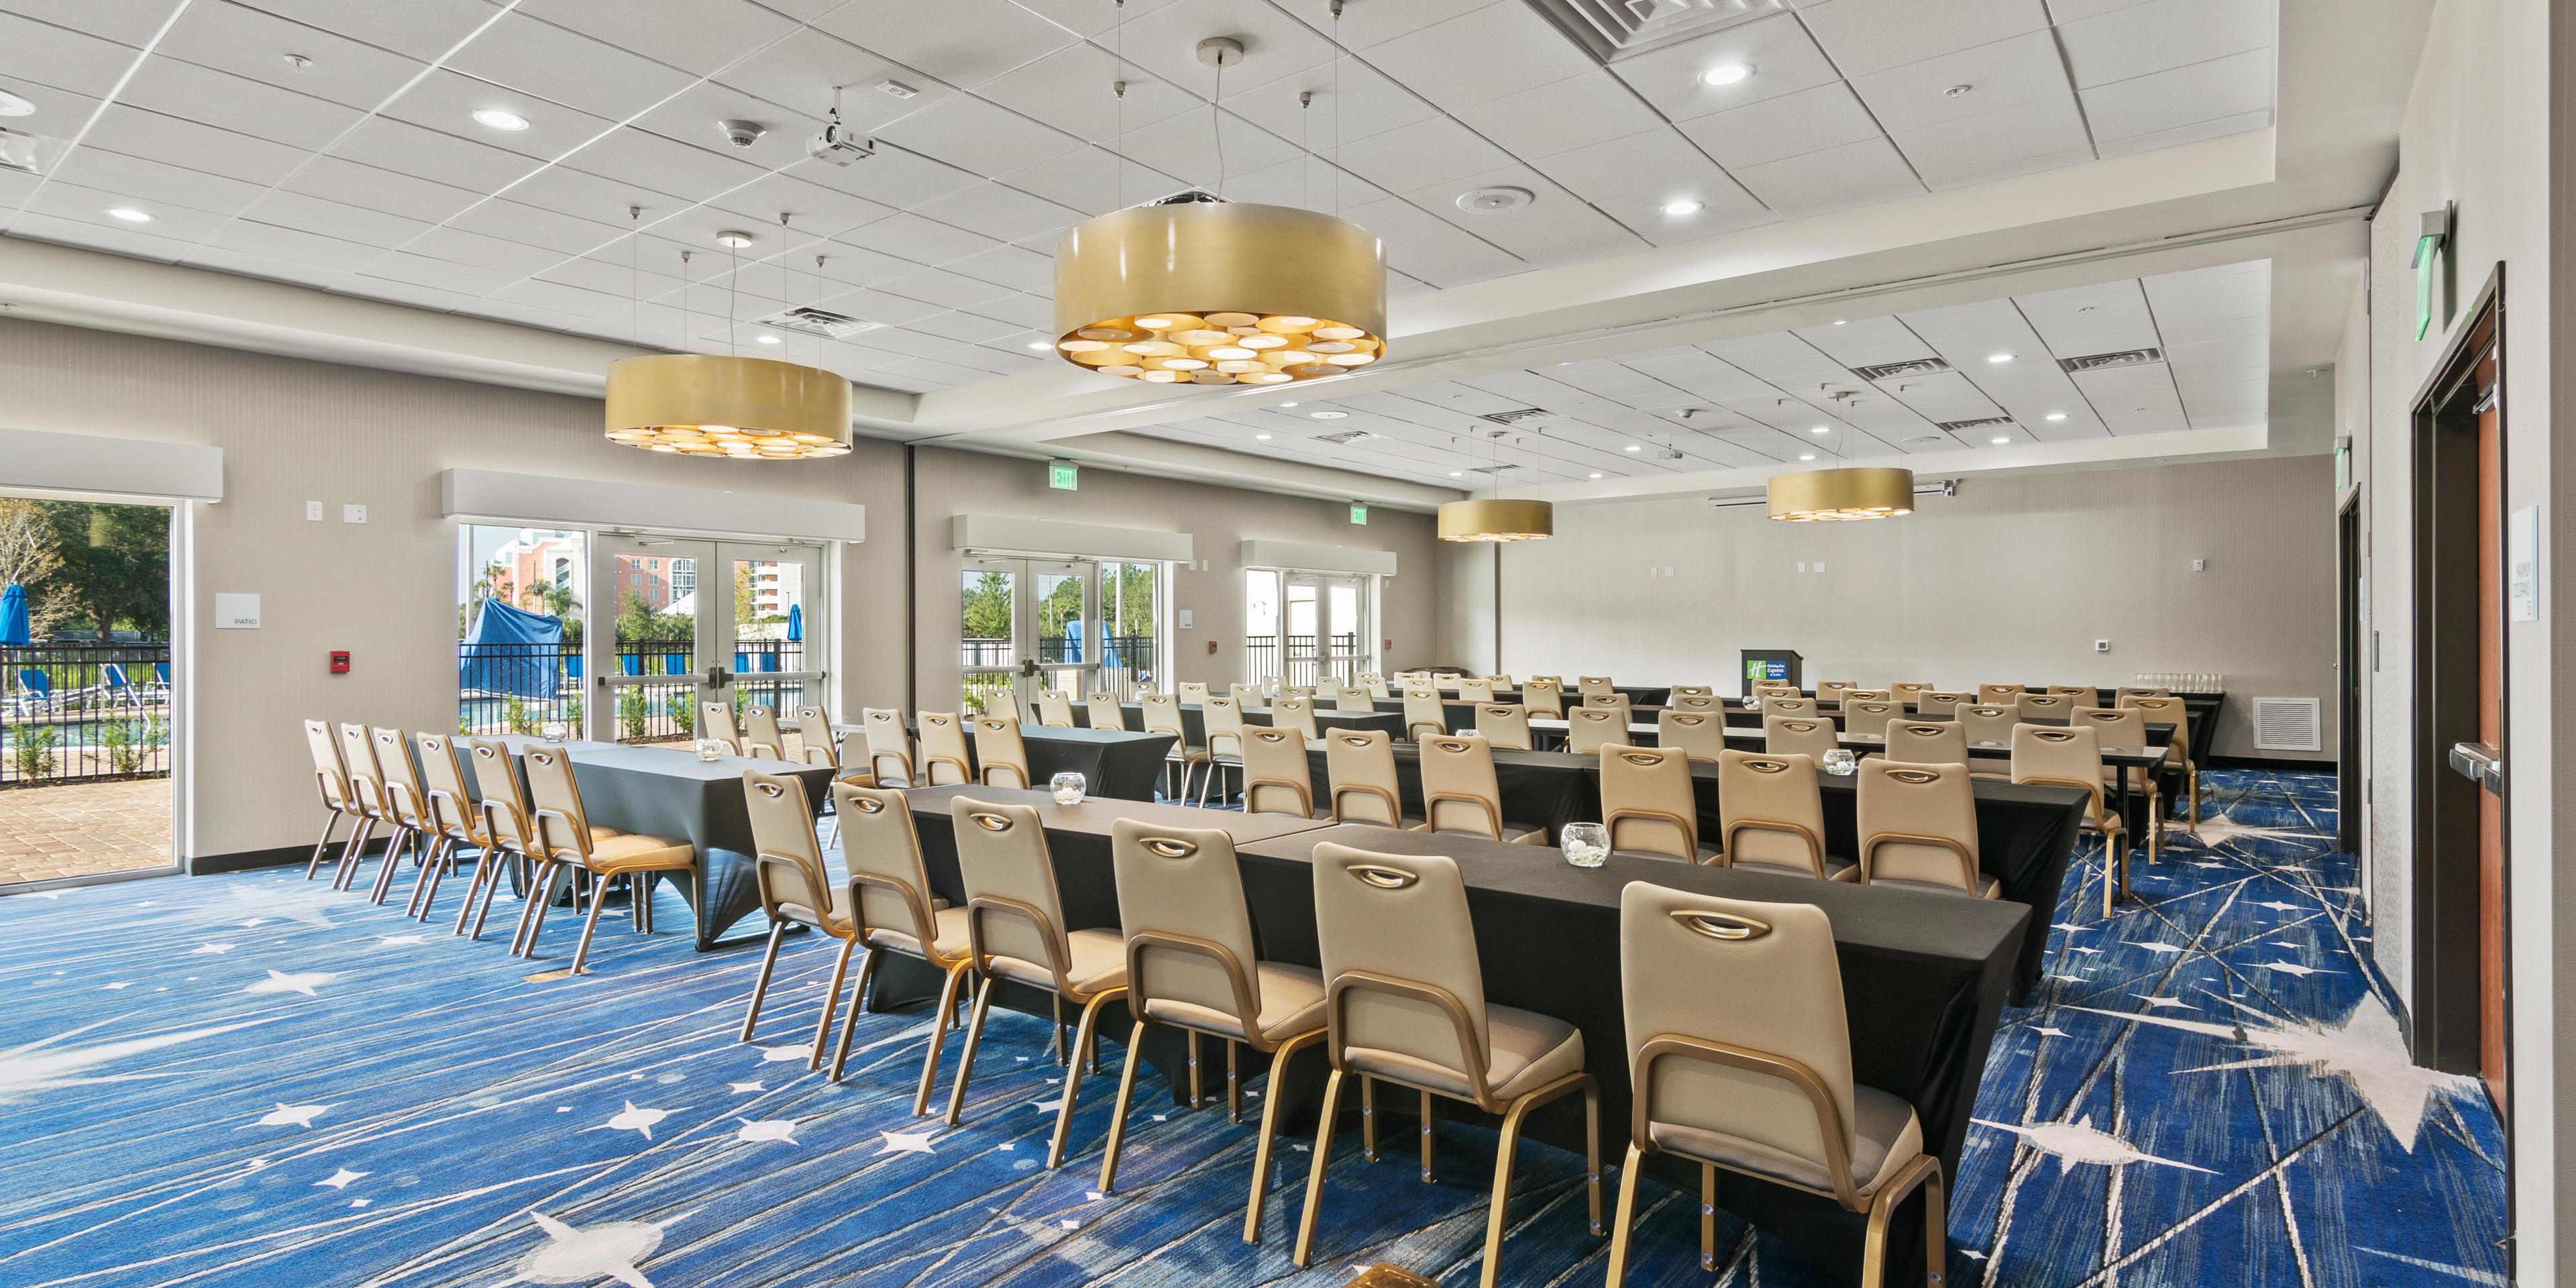 Find your space with us! Our property features a 2000 sqft meeting and event space with an 1800 sqft pre-function area. We make planning easy so you can focus your time on making your meeting a success.